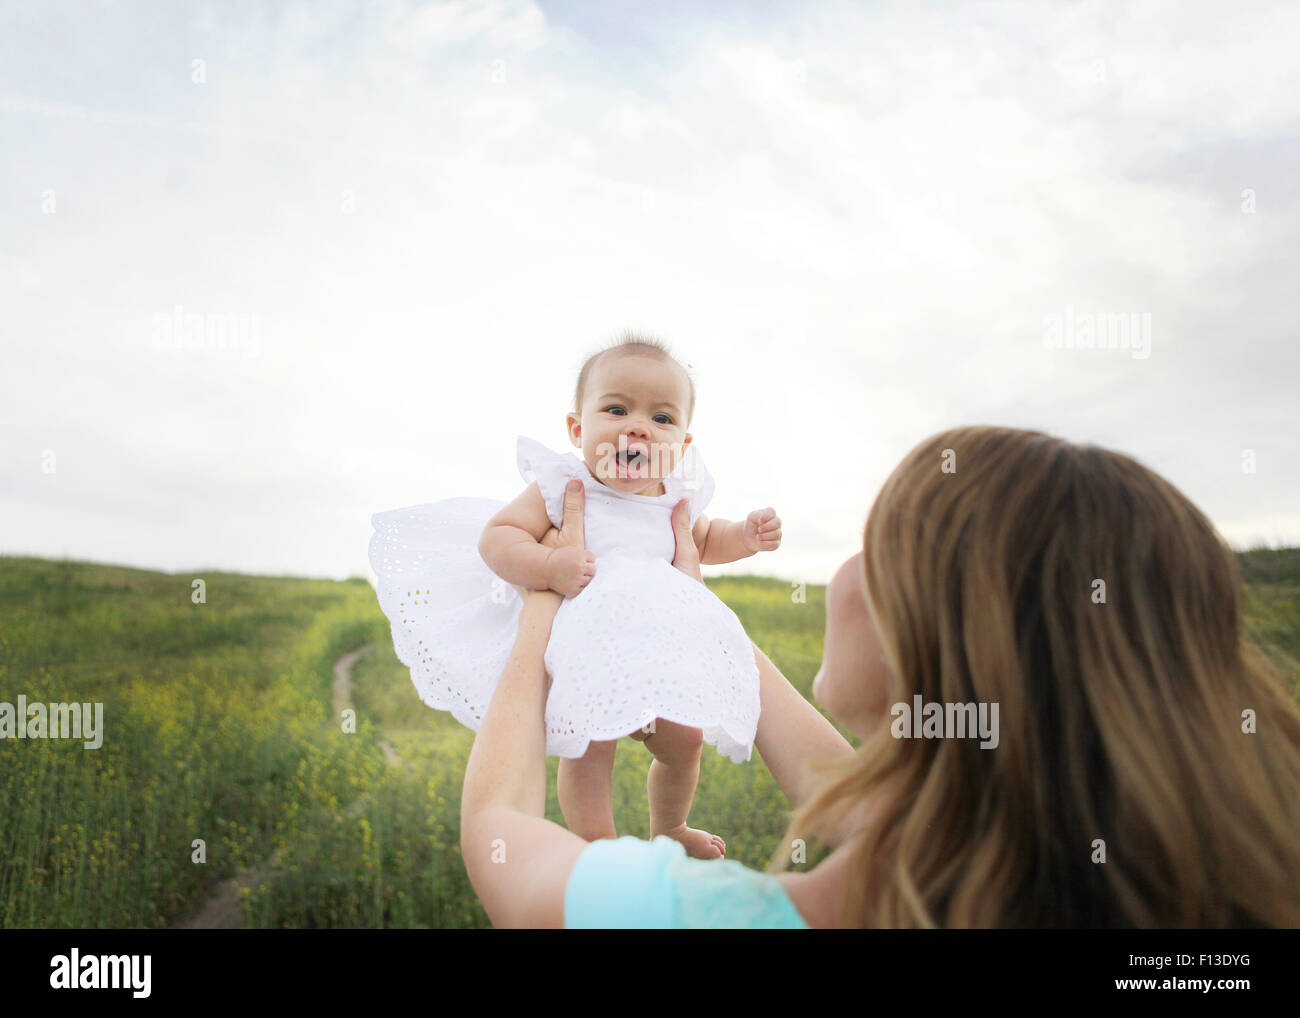 Mother lifting baby girl in the air Stock Photo